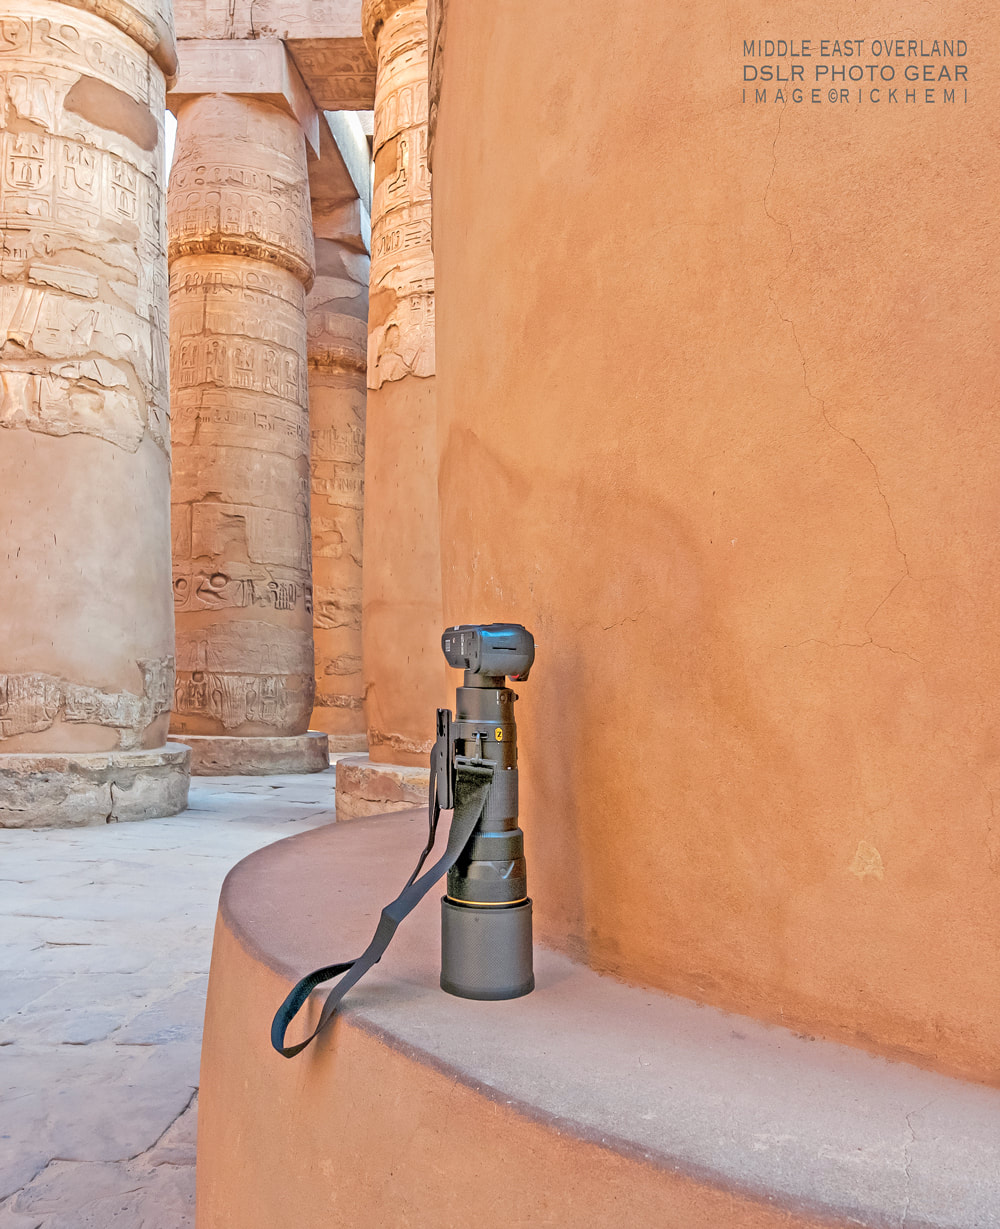 solo overland travel Middle East, DSLR photo gear, what's good & reliable? image by Rick Hemi